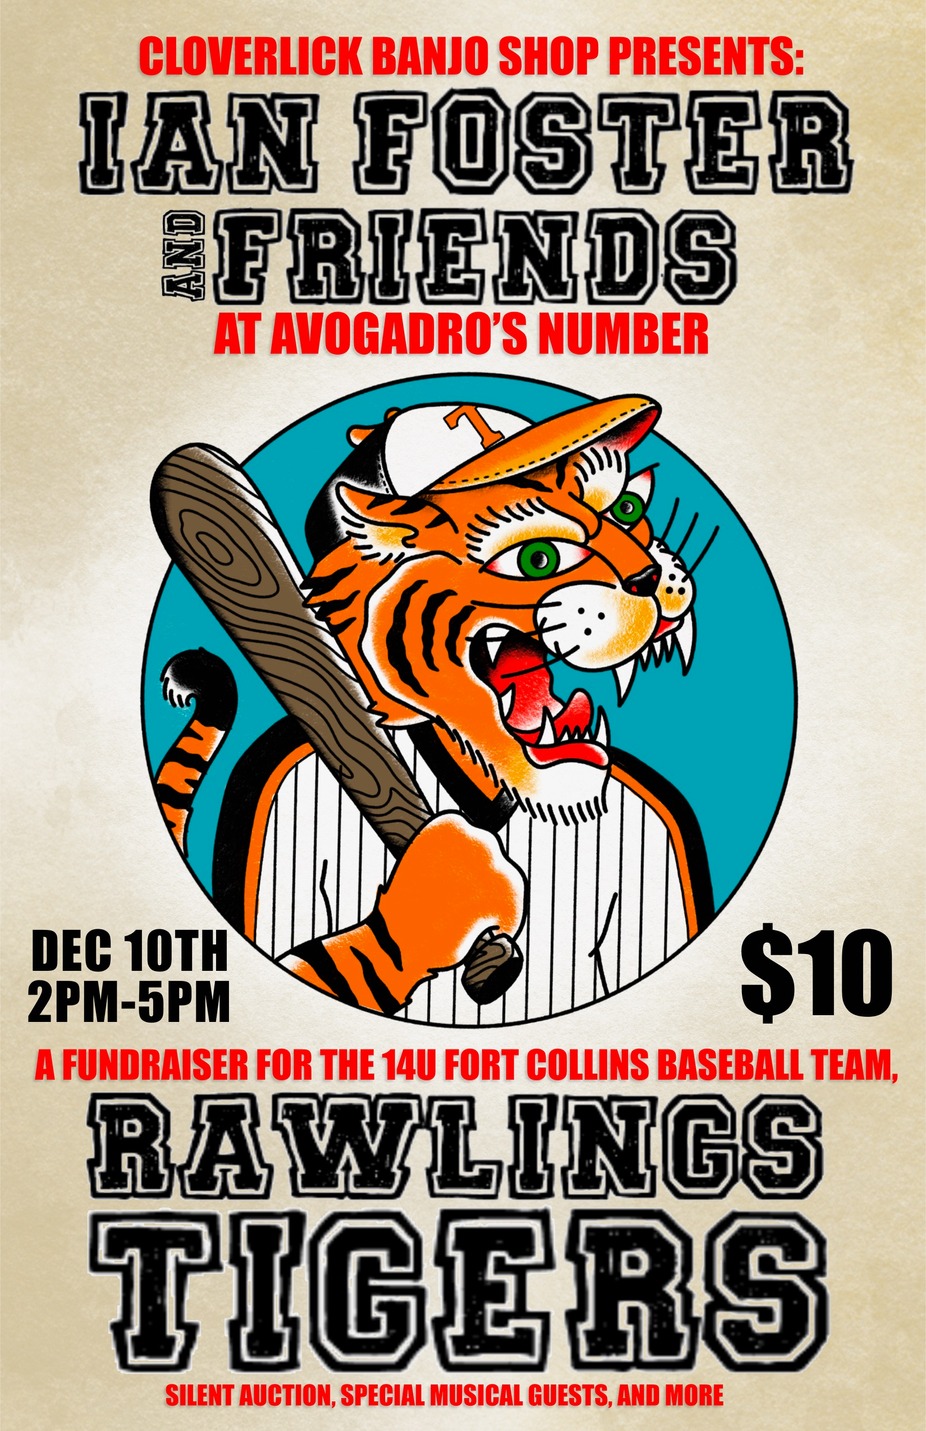 Rawling Tigers Baseball Team Fundraiser with Ian Foster and Friends event photo